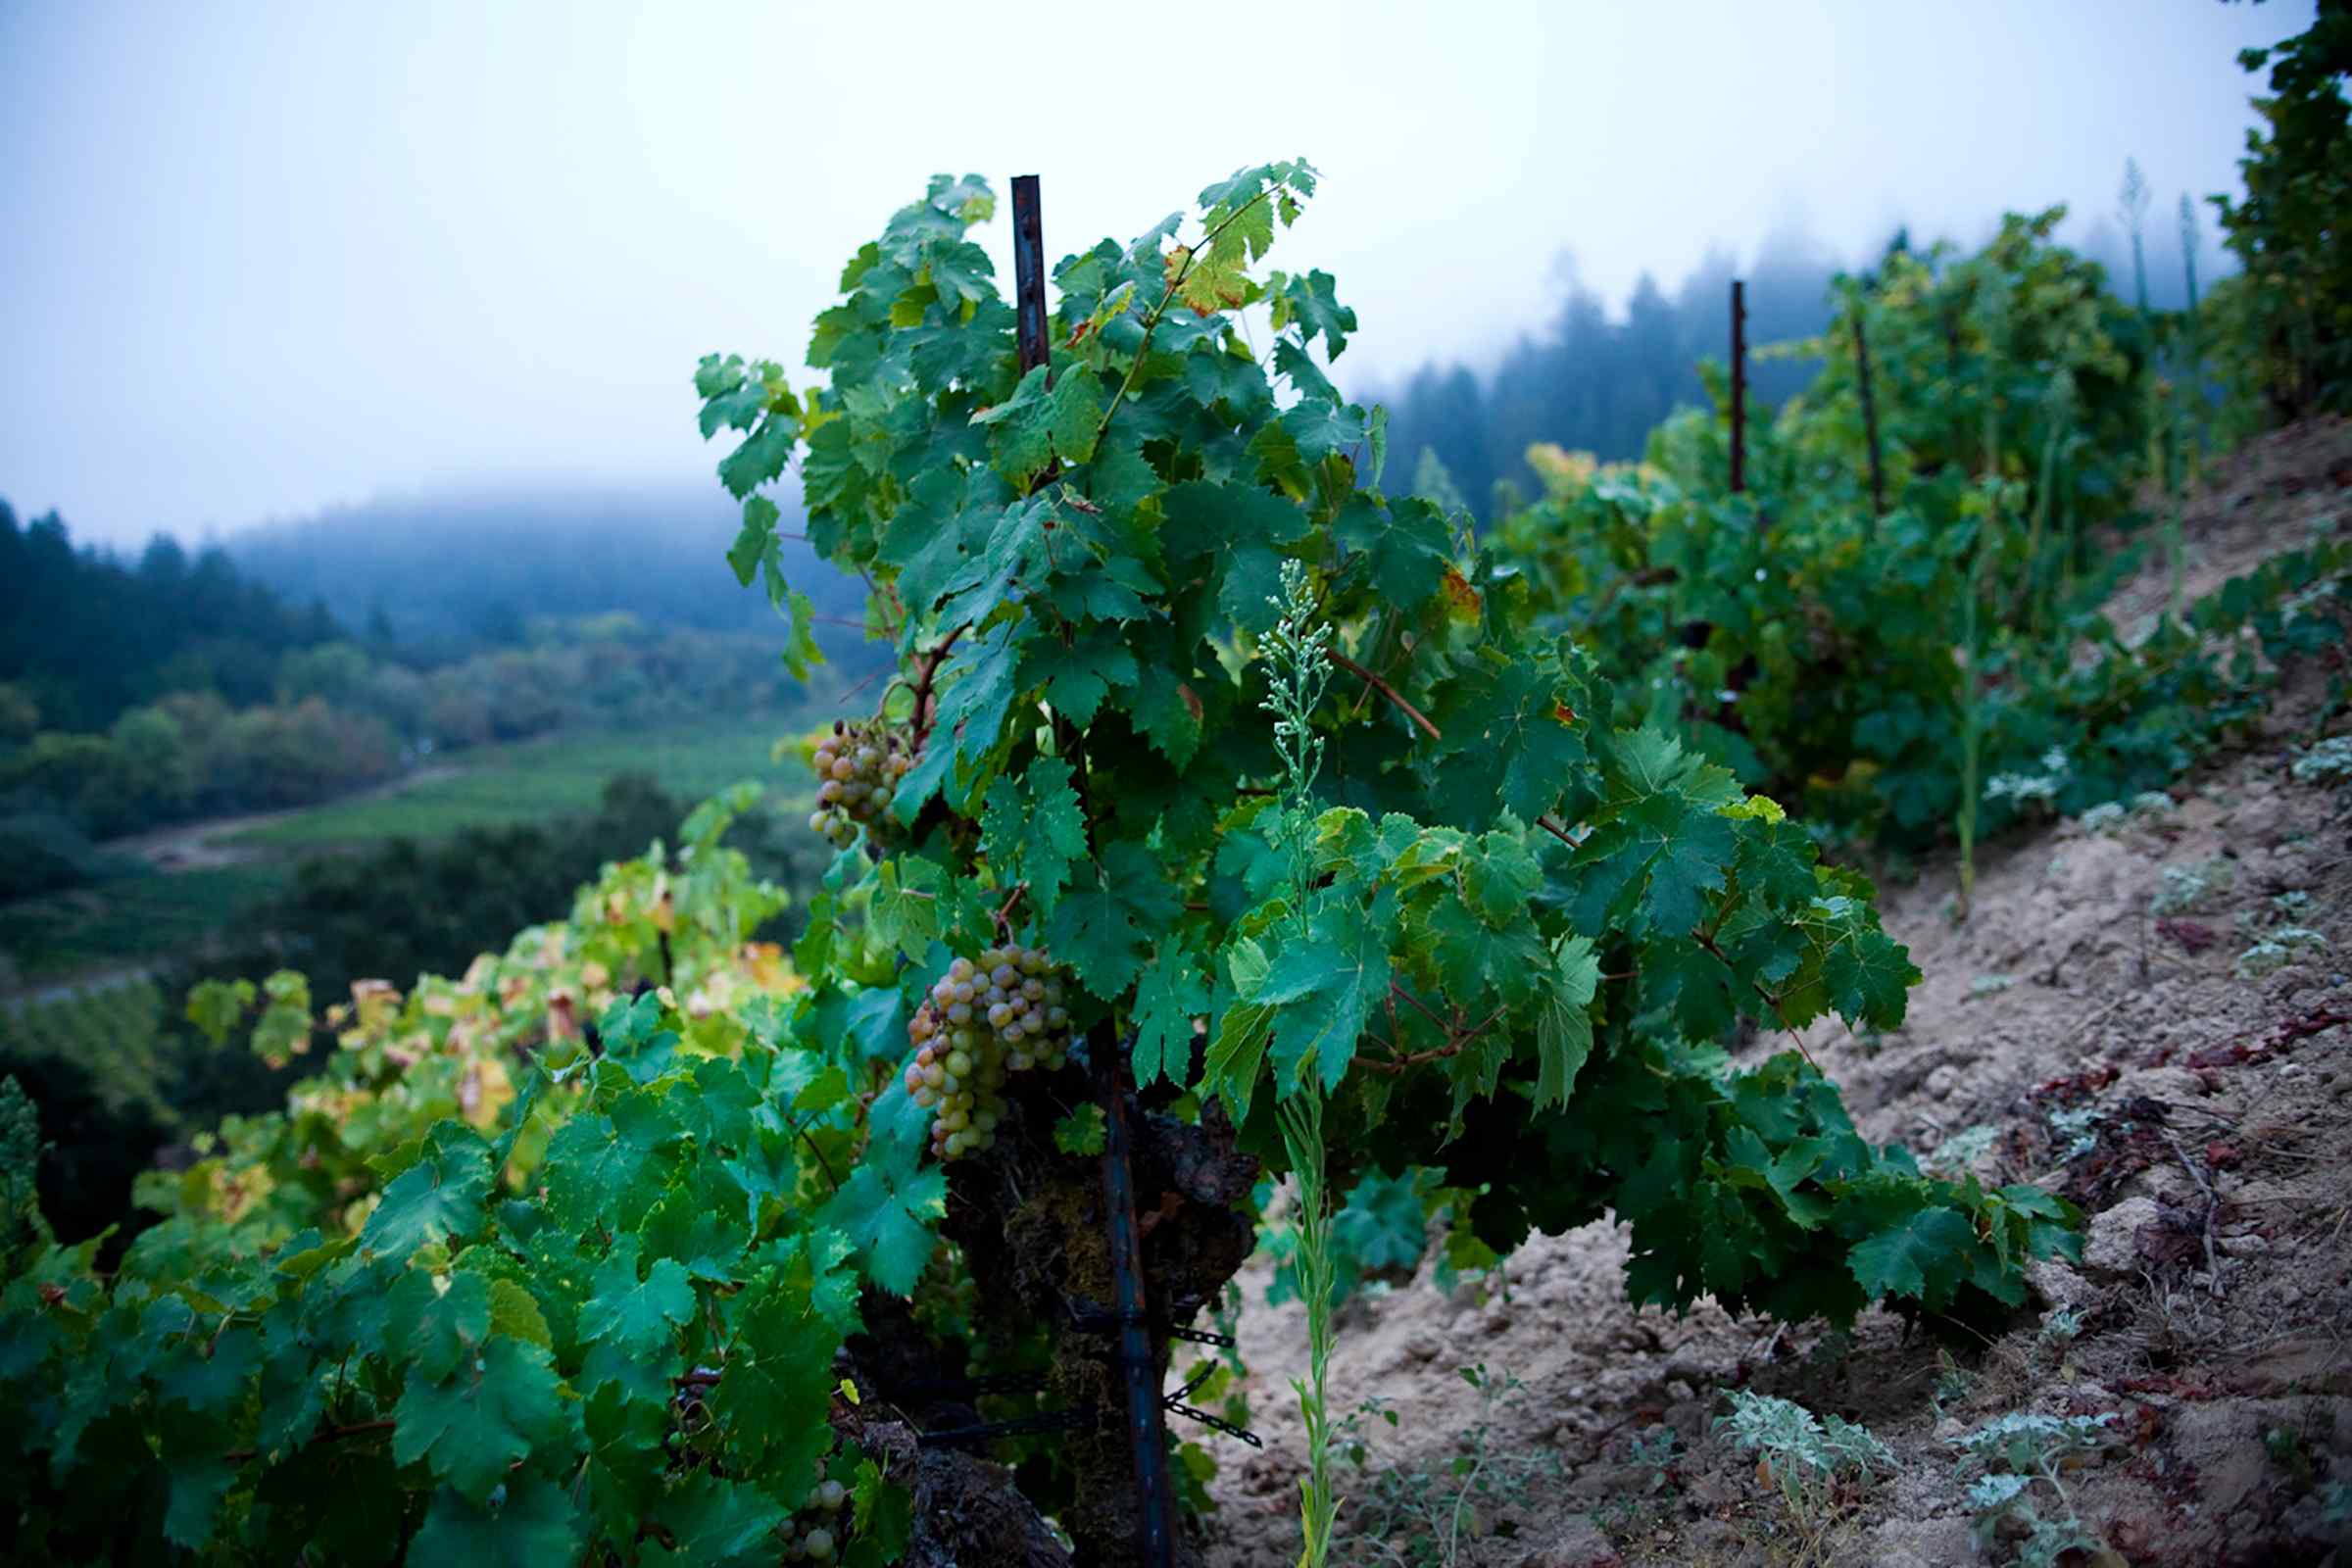 Russian River Valley fog surrounds Muscat grapes on hill